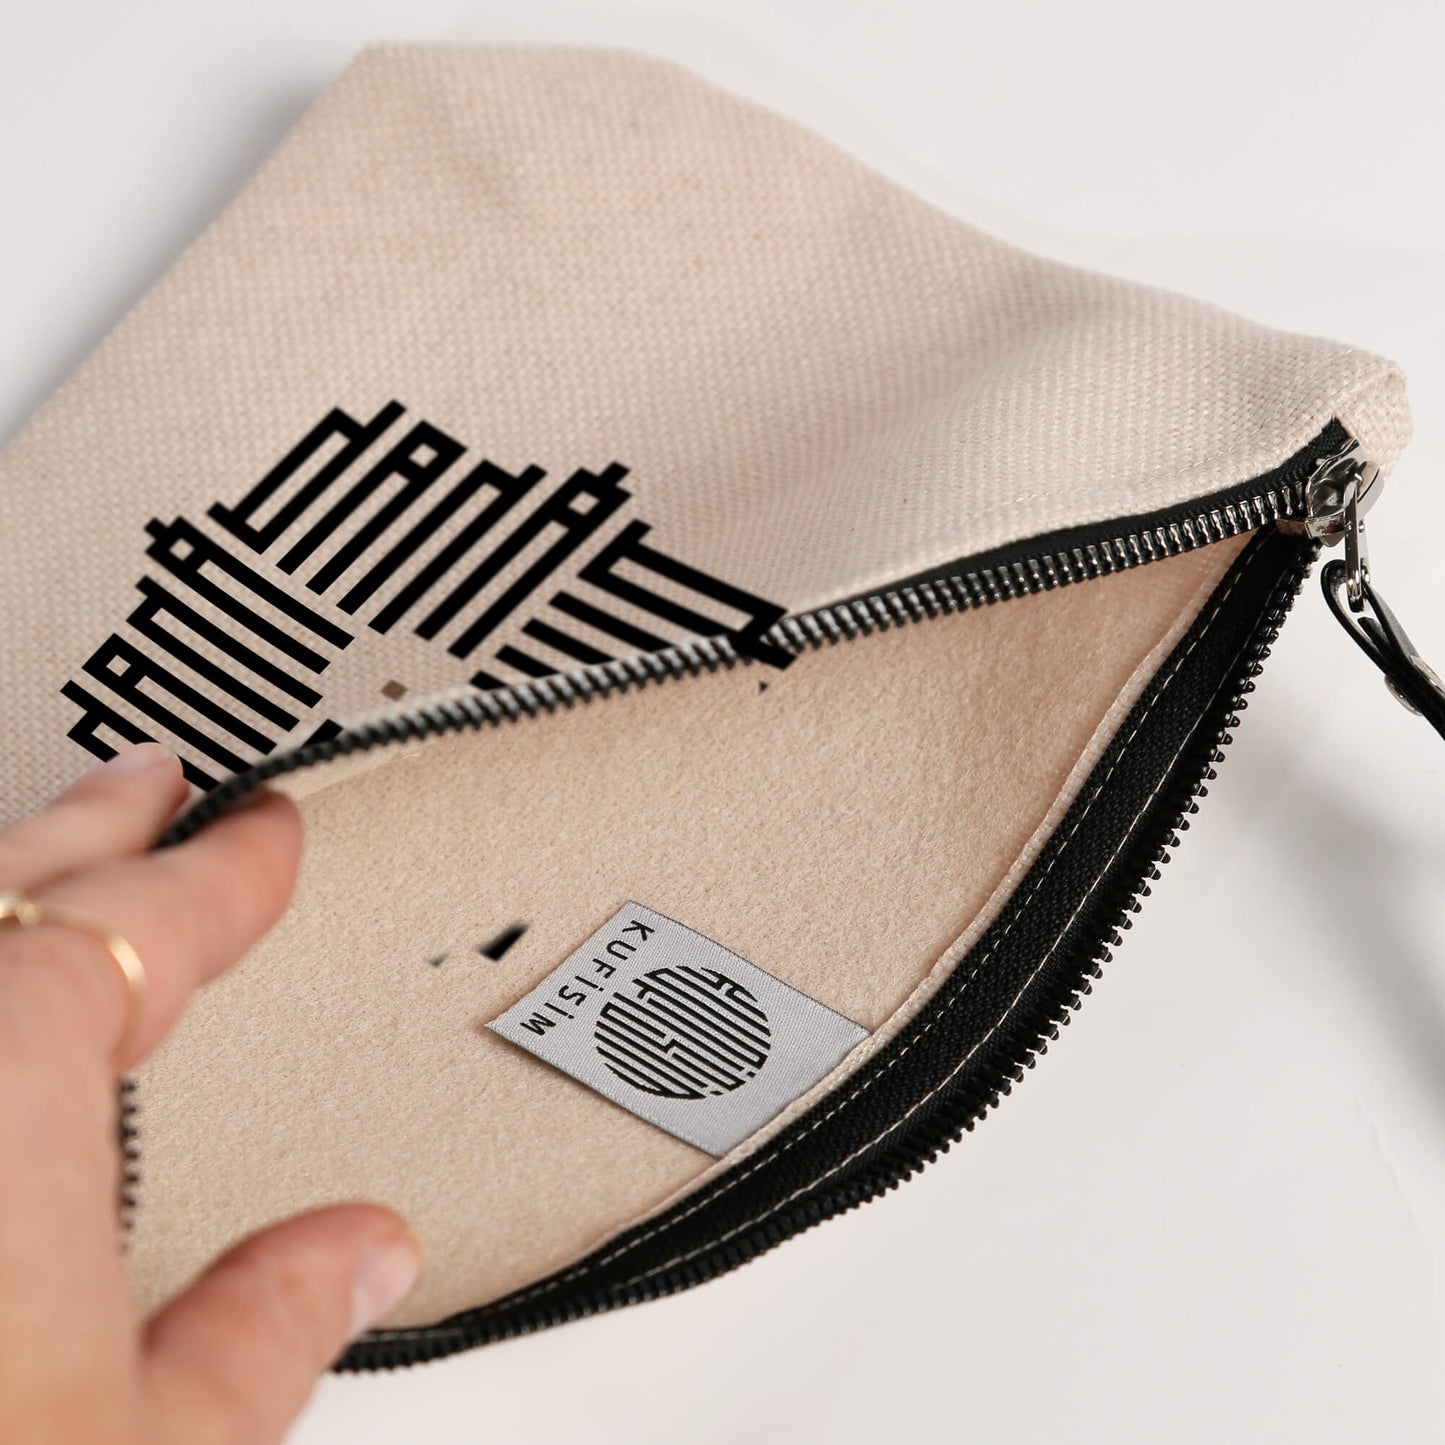 Kufic Small Carryall Pouch (16x25 cm)